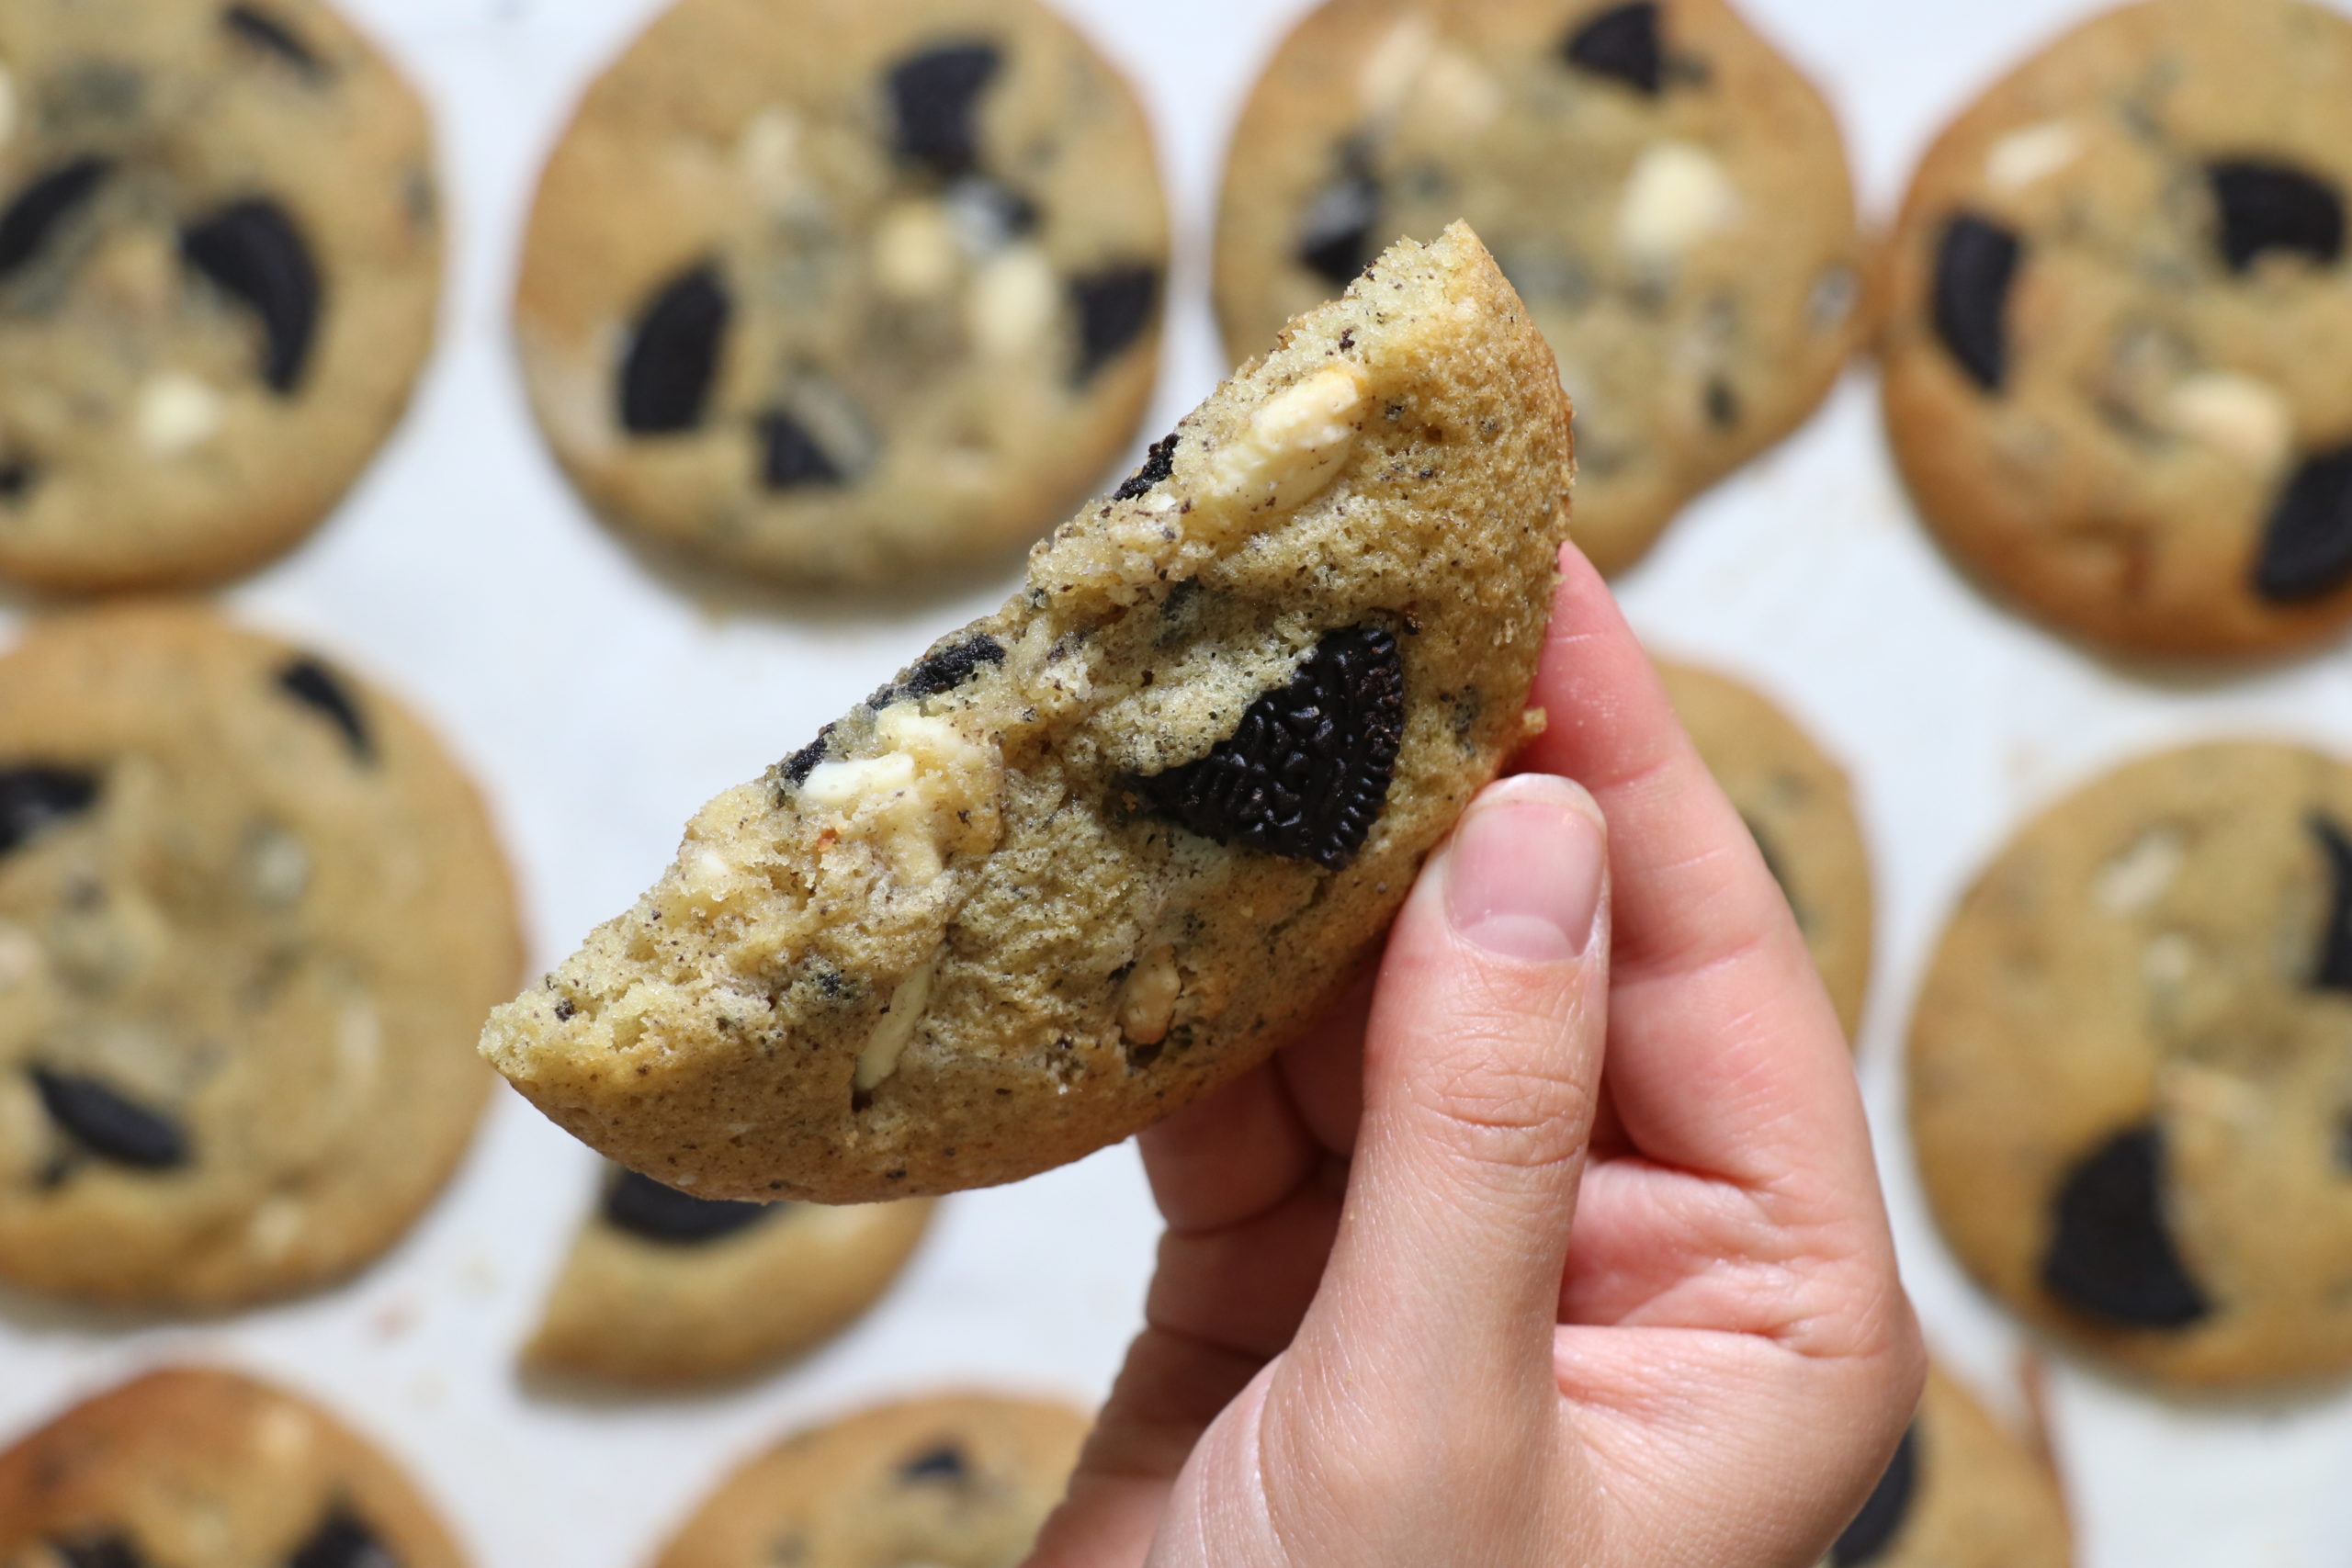 Oreo white chocolate chip cookie – Soft chewy cookie